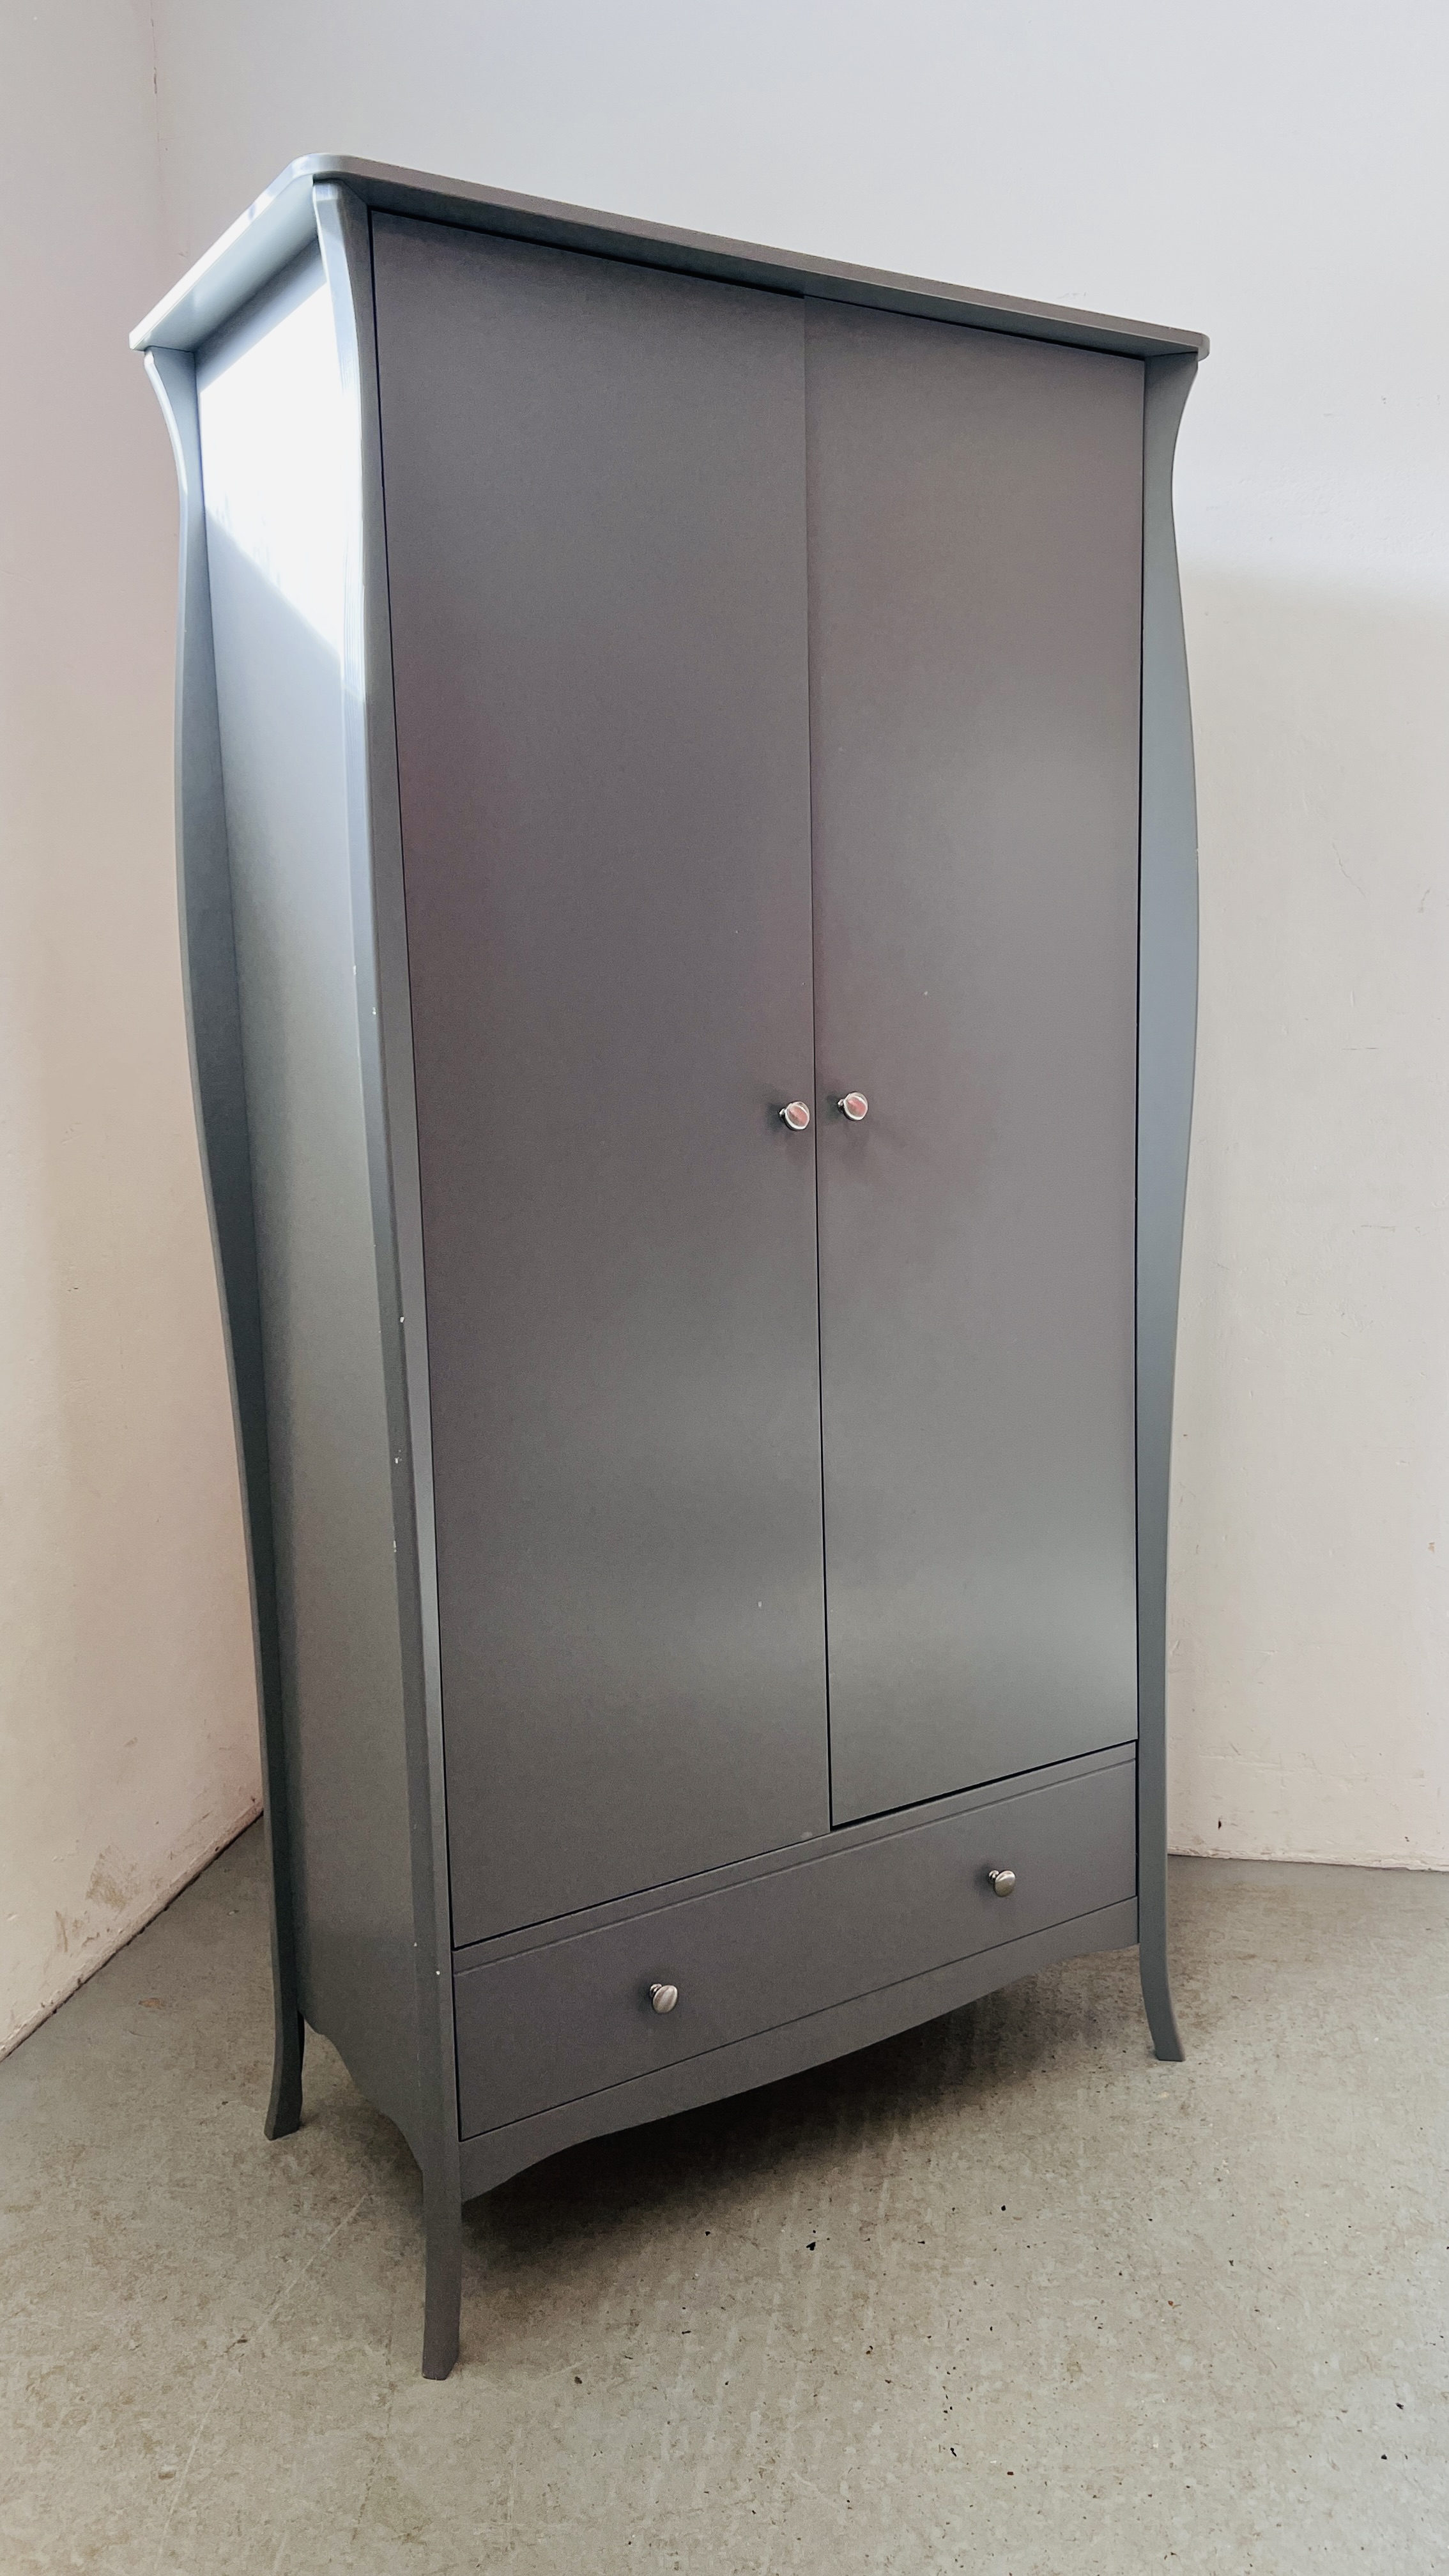 A MODERN GREY FINISH DOUBLE WARDROBE WITH DRAWER TO BASE WIDTH 100CM. DEPTH 50CM. HEIGHT 192CM. - Image 11 of 12